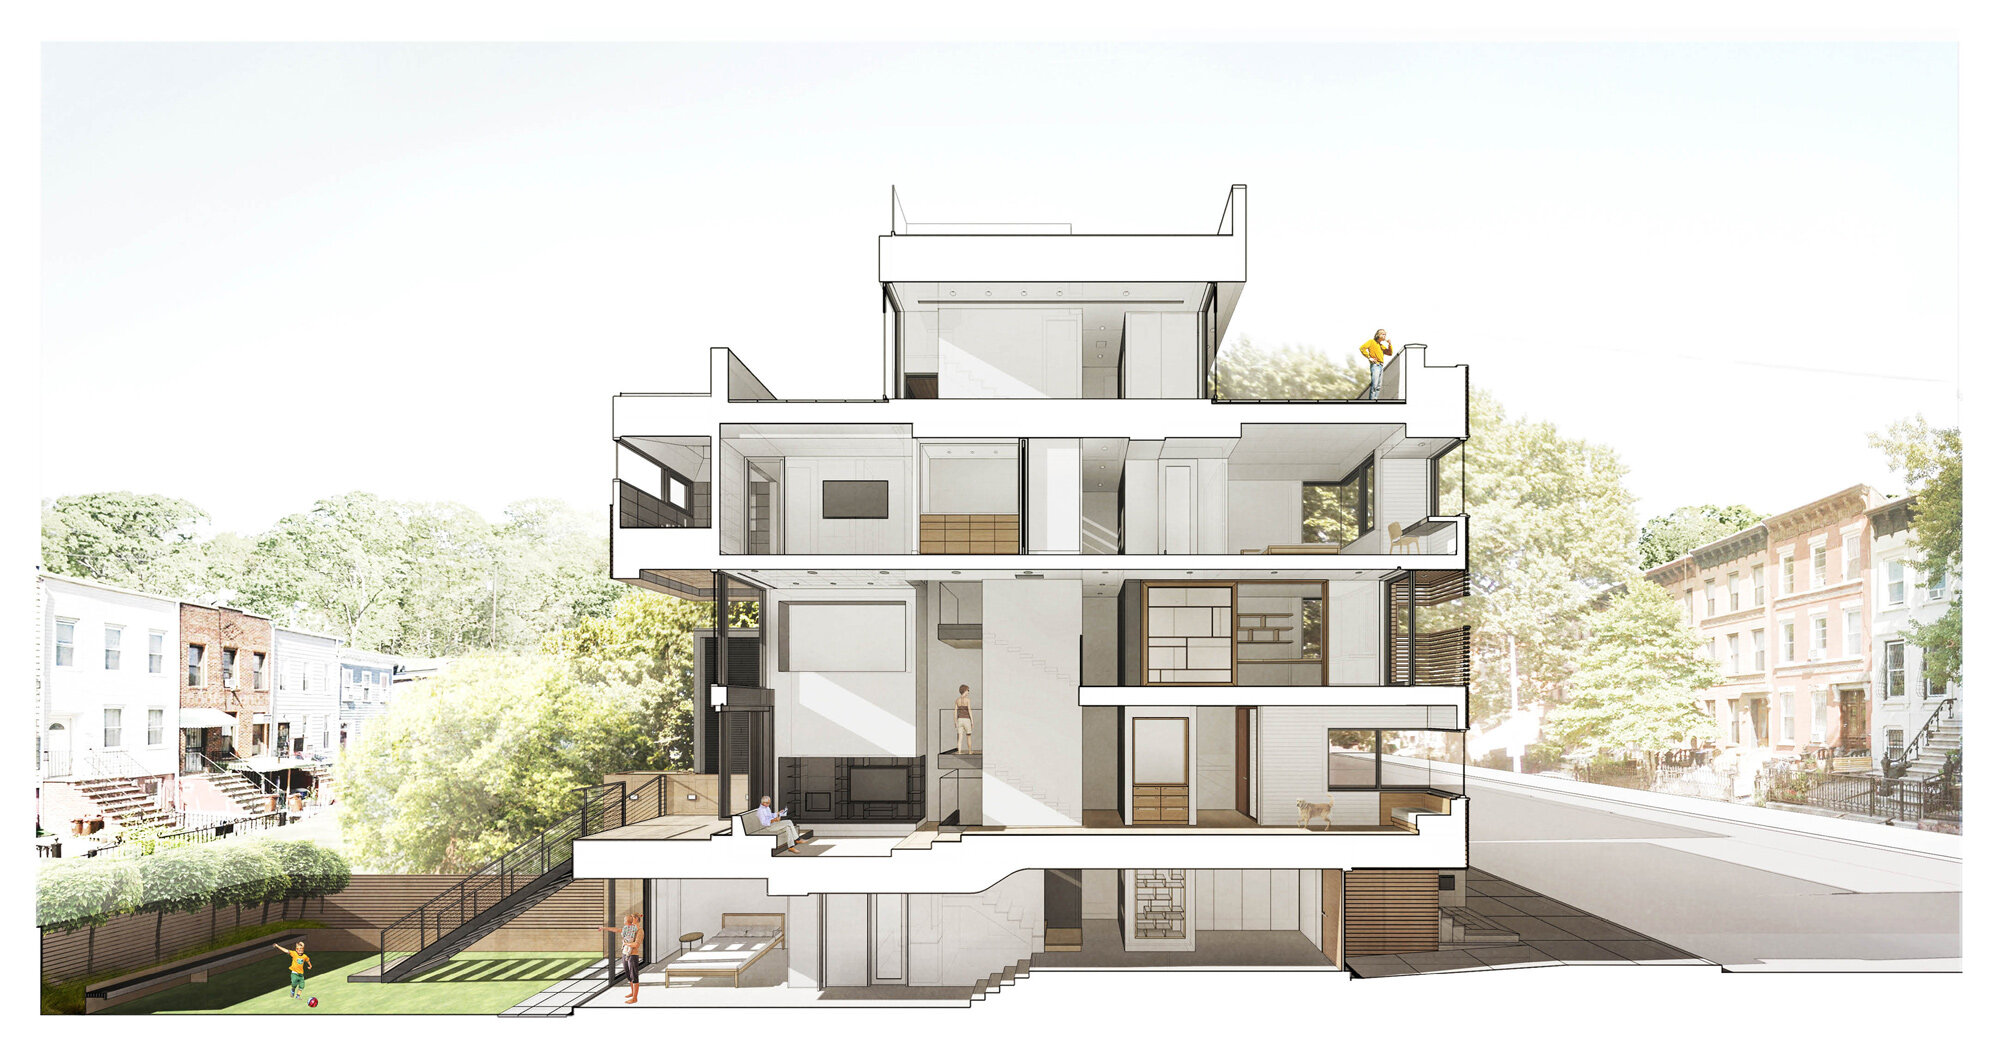 07--res4-re4a-resolution-4-architecture-park-slope-townhouse-brooklyn-modern-home-floor-section-perspective-drawing.jpg